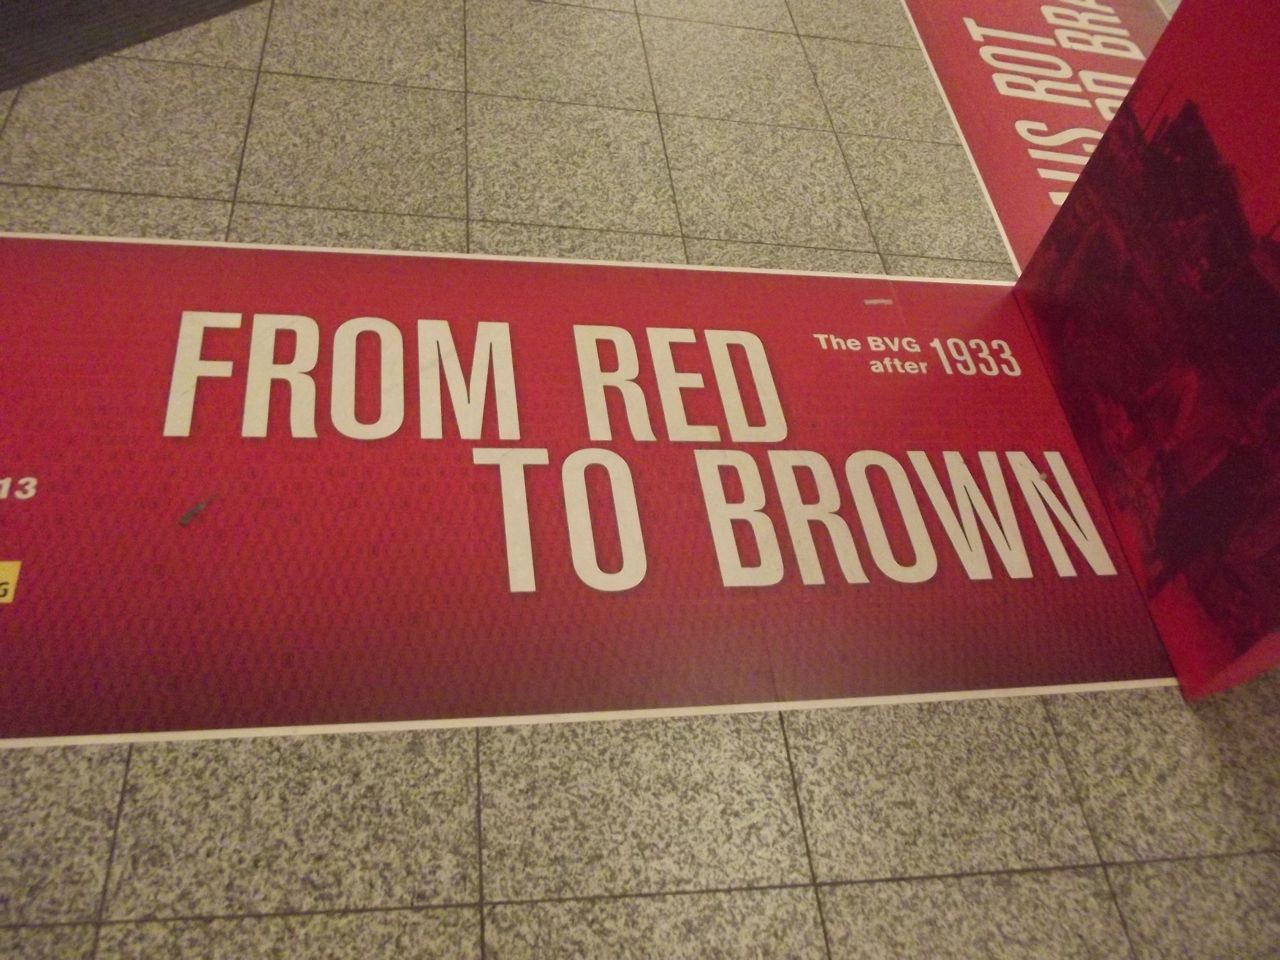 You are currently viewing <!--:en-->“From Red to Brown” a  Small exhibition at Alexanderplatz Train Station in Berlin!!!<!--:-->